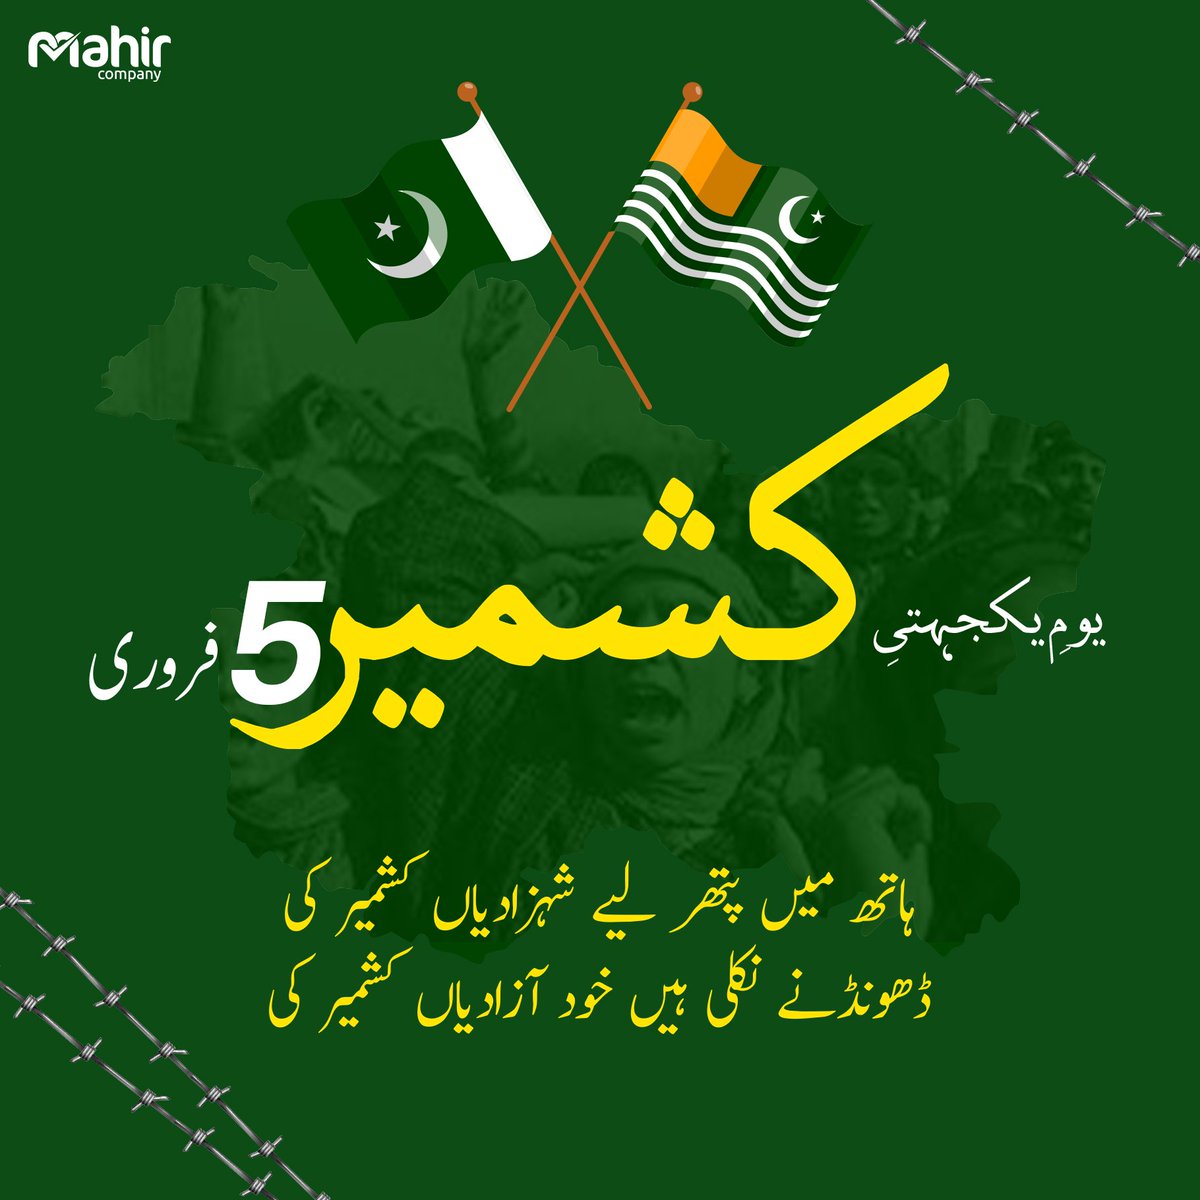 Remembering the struggle for freedom and human rights in Kashmir on this Kashmir Day. Mahir Company stands in solidarity with the people of Kashmir. May Allah bless them with freedom soon.

#SolidarityDay #KashmirDay #kashmirSolidartyDay  #TeamMahir #MahirCompany